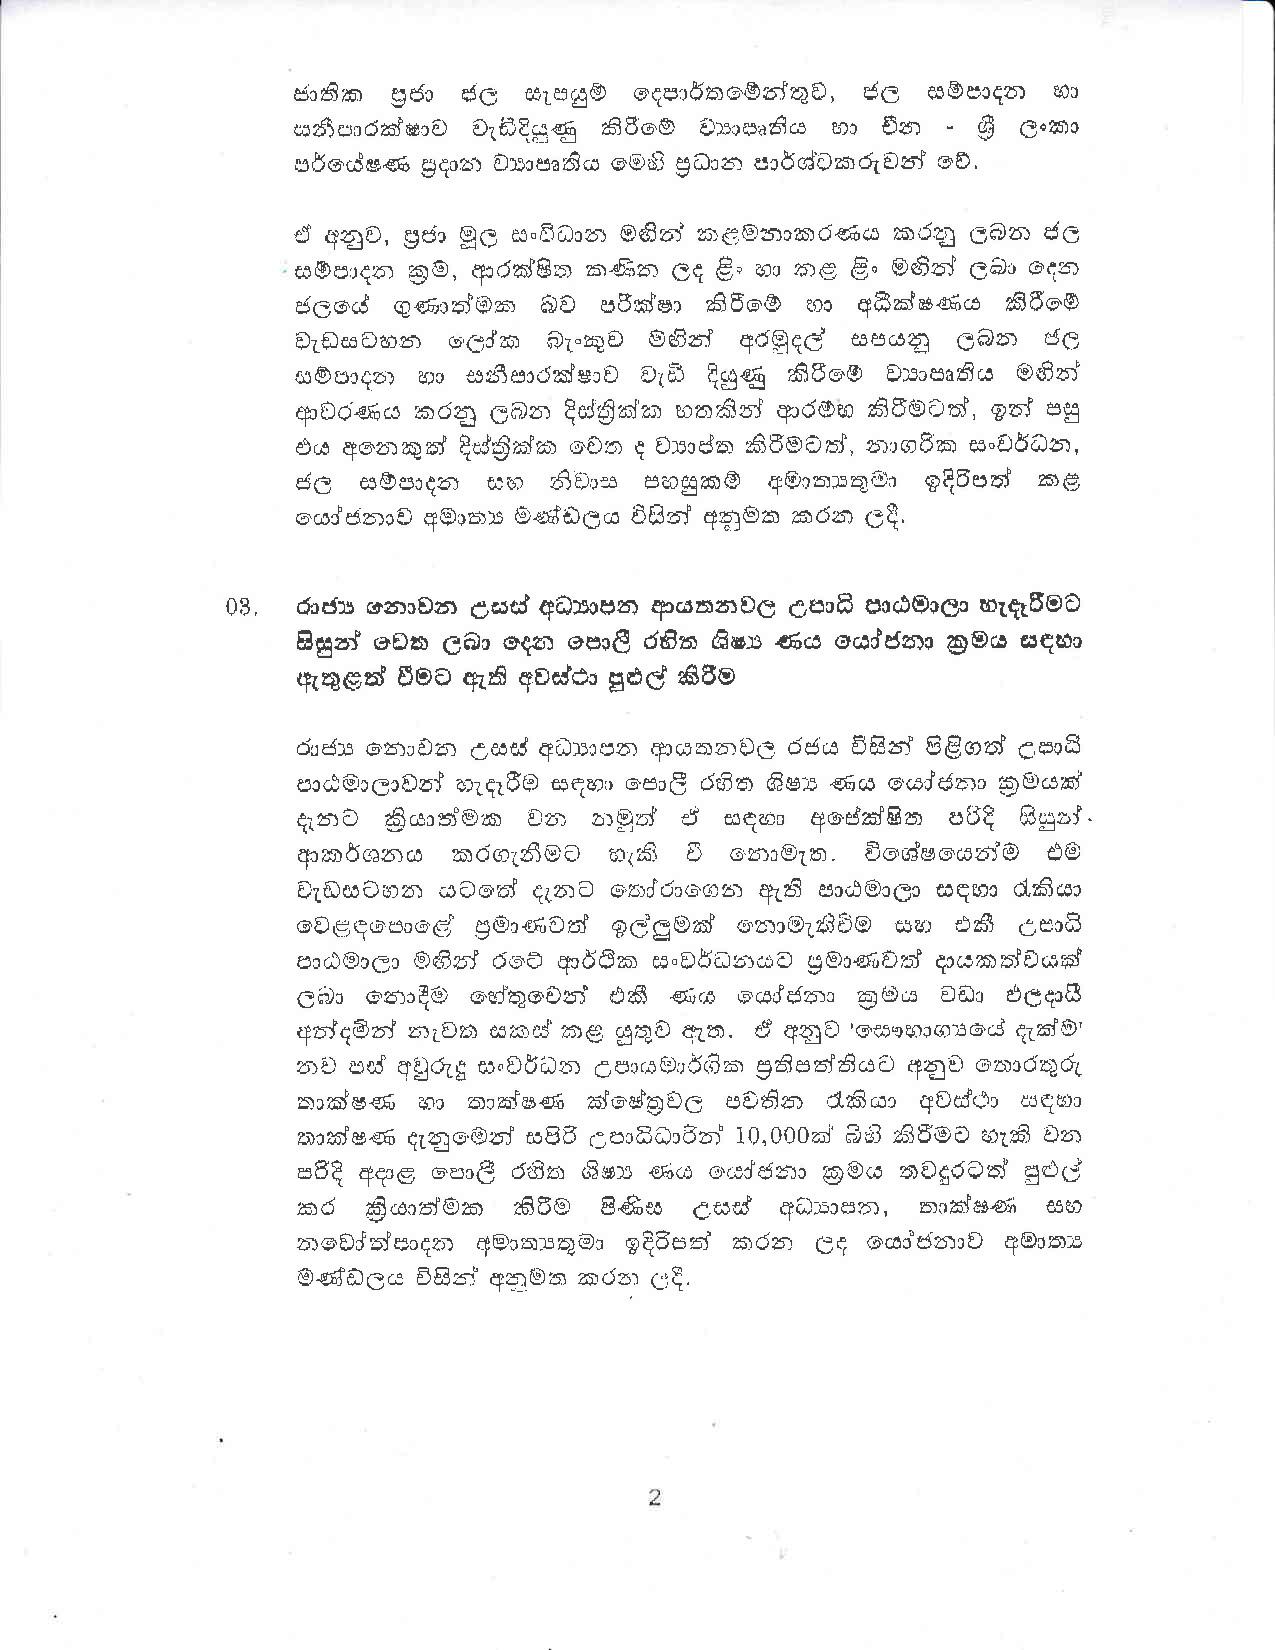 Cabinet Decision on 02.01.2020 1 page 002